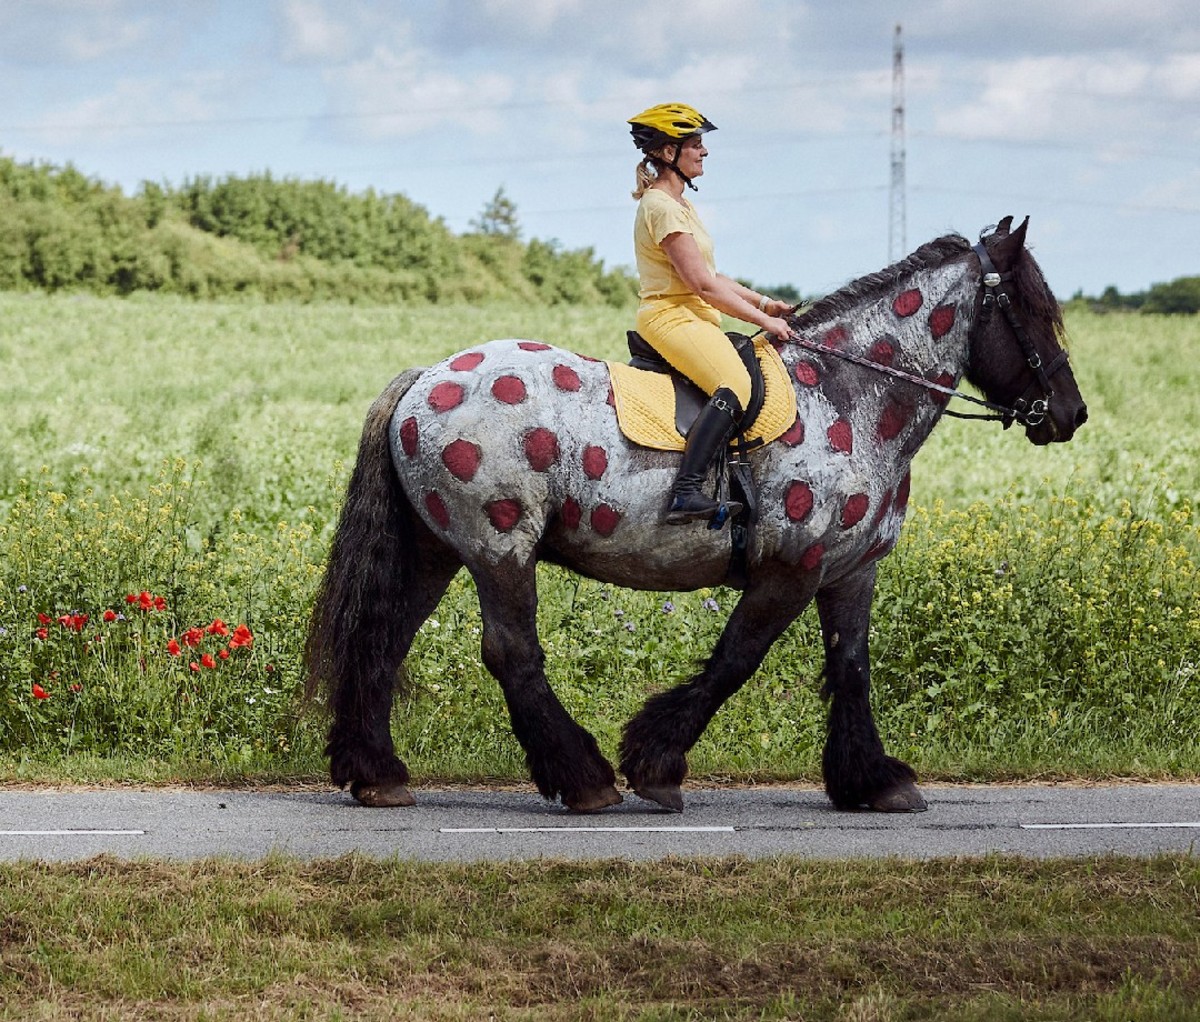 Danish woman in a yellow jersey rides a polka dotted horse in Danish countryside